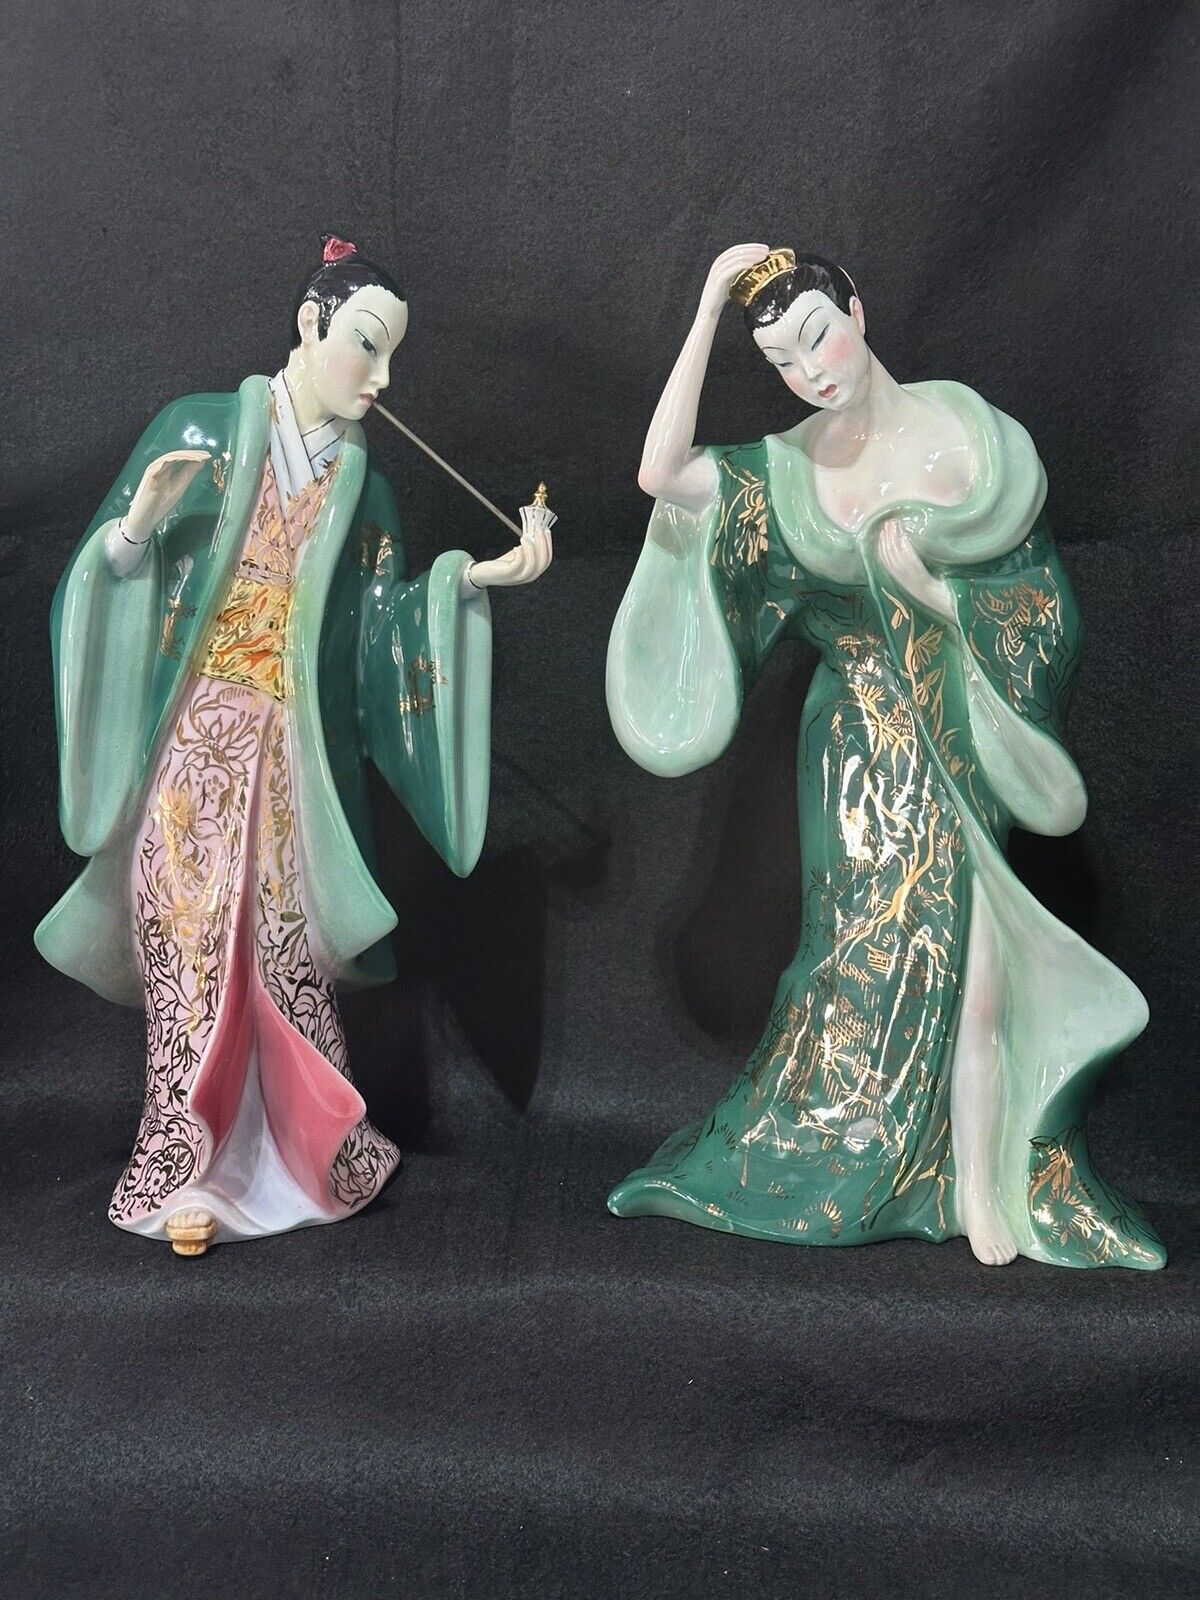 GIOVANNI RONZAN - Italy - Asian Inspired Figurines - Porcelain